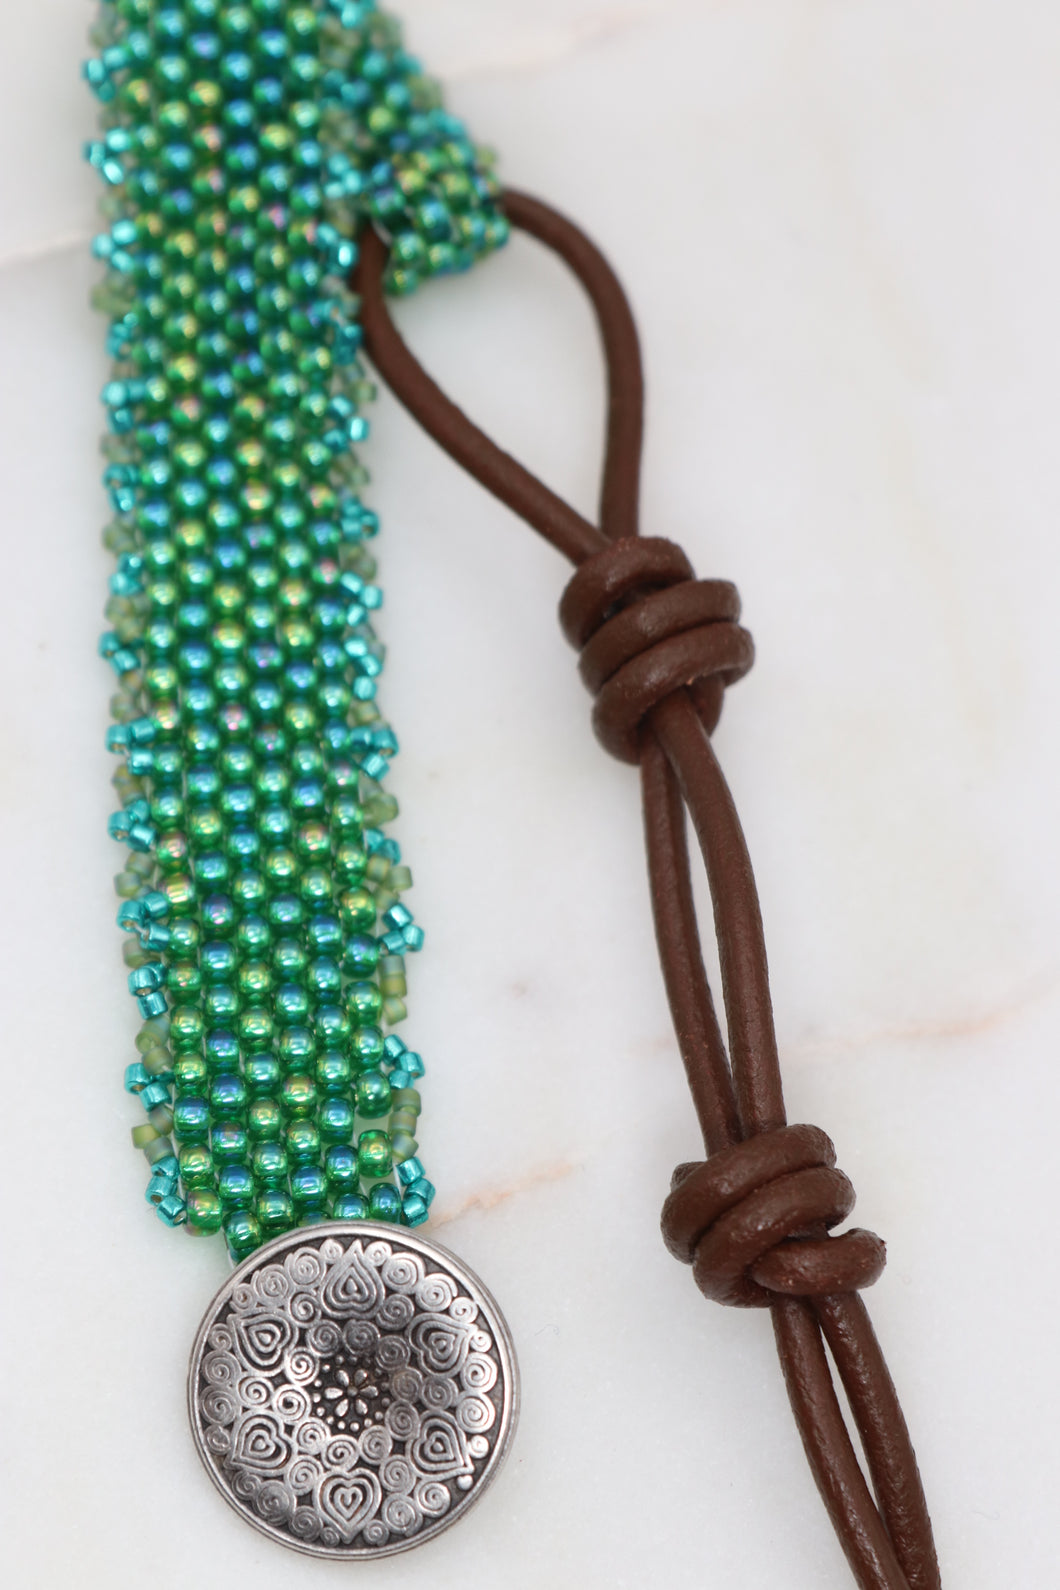 hand woven seed bead bracelet in an emerald green AB finish with a miyuki delica picot edge.  Adjustable leather loop and button closure